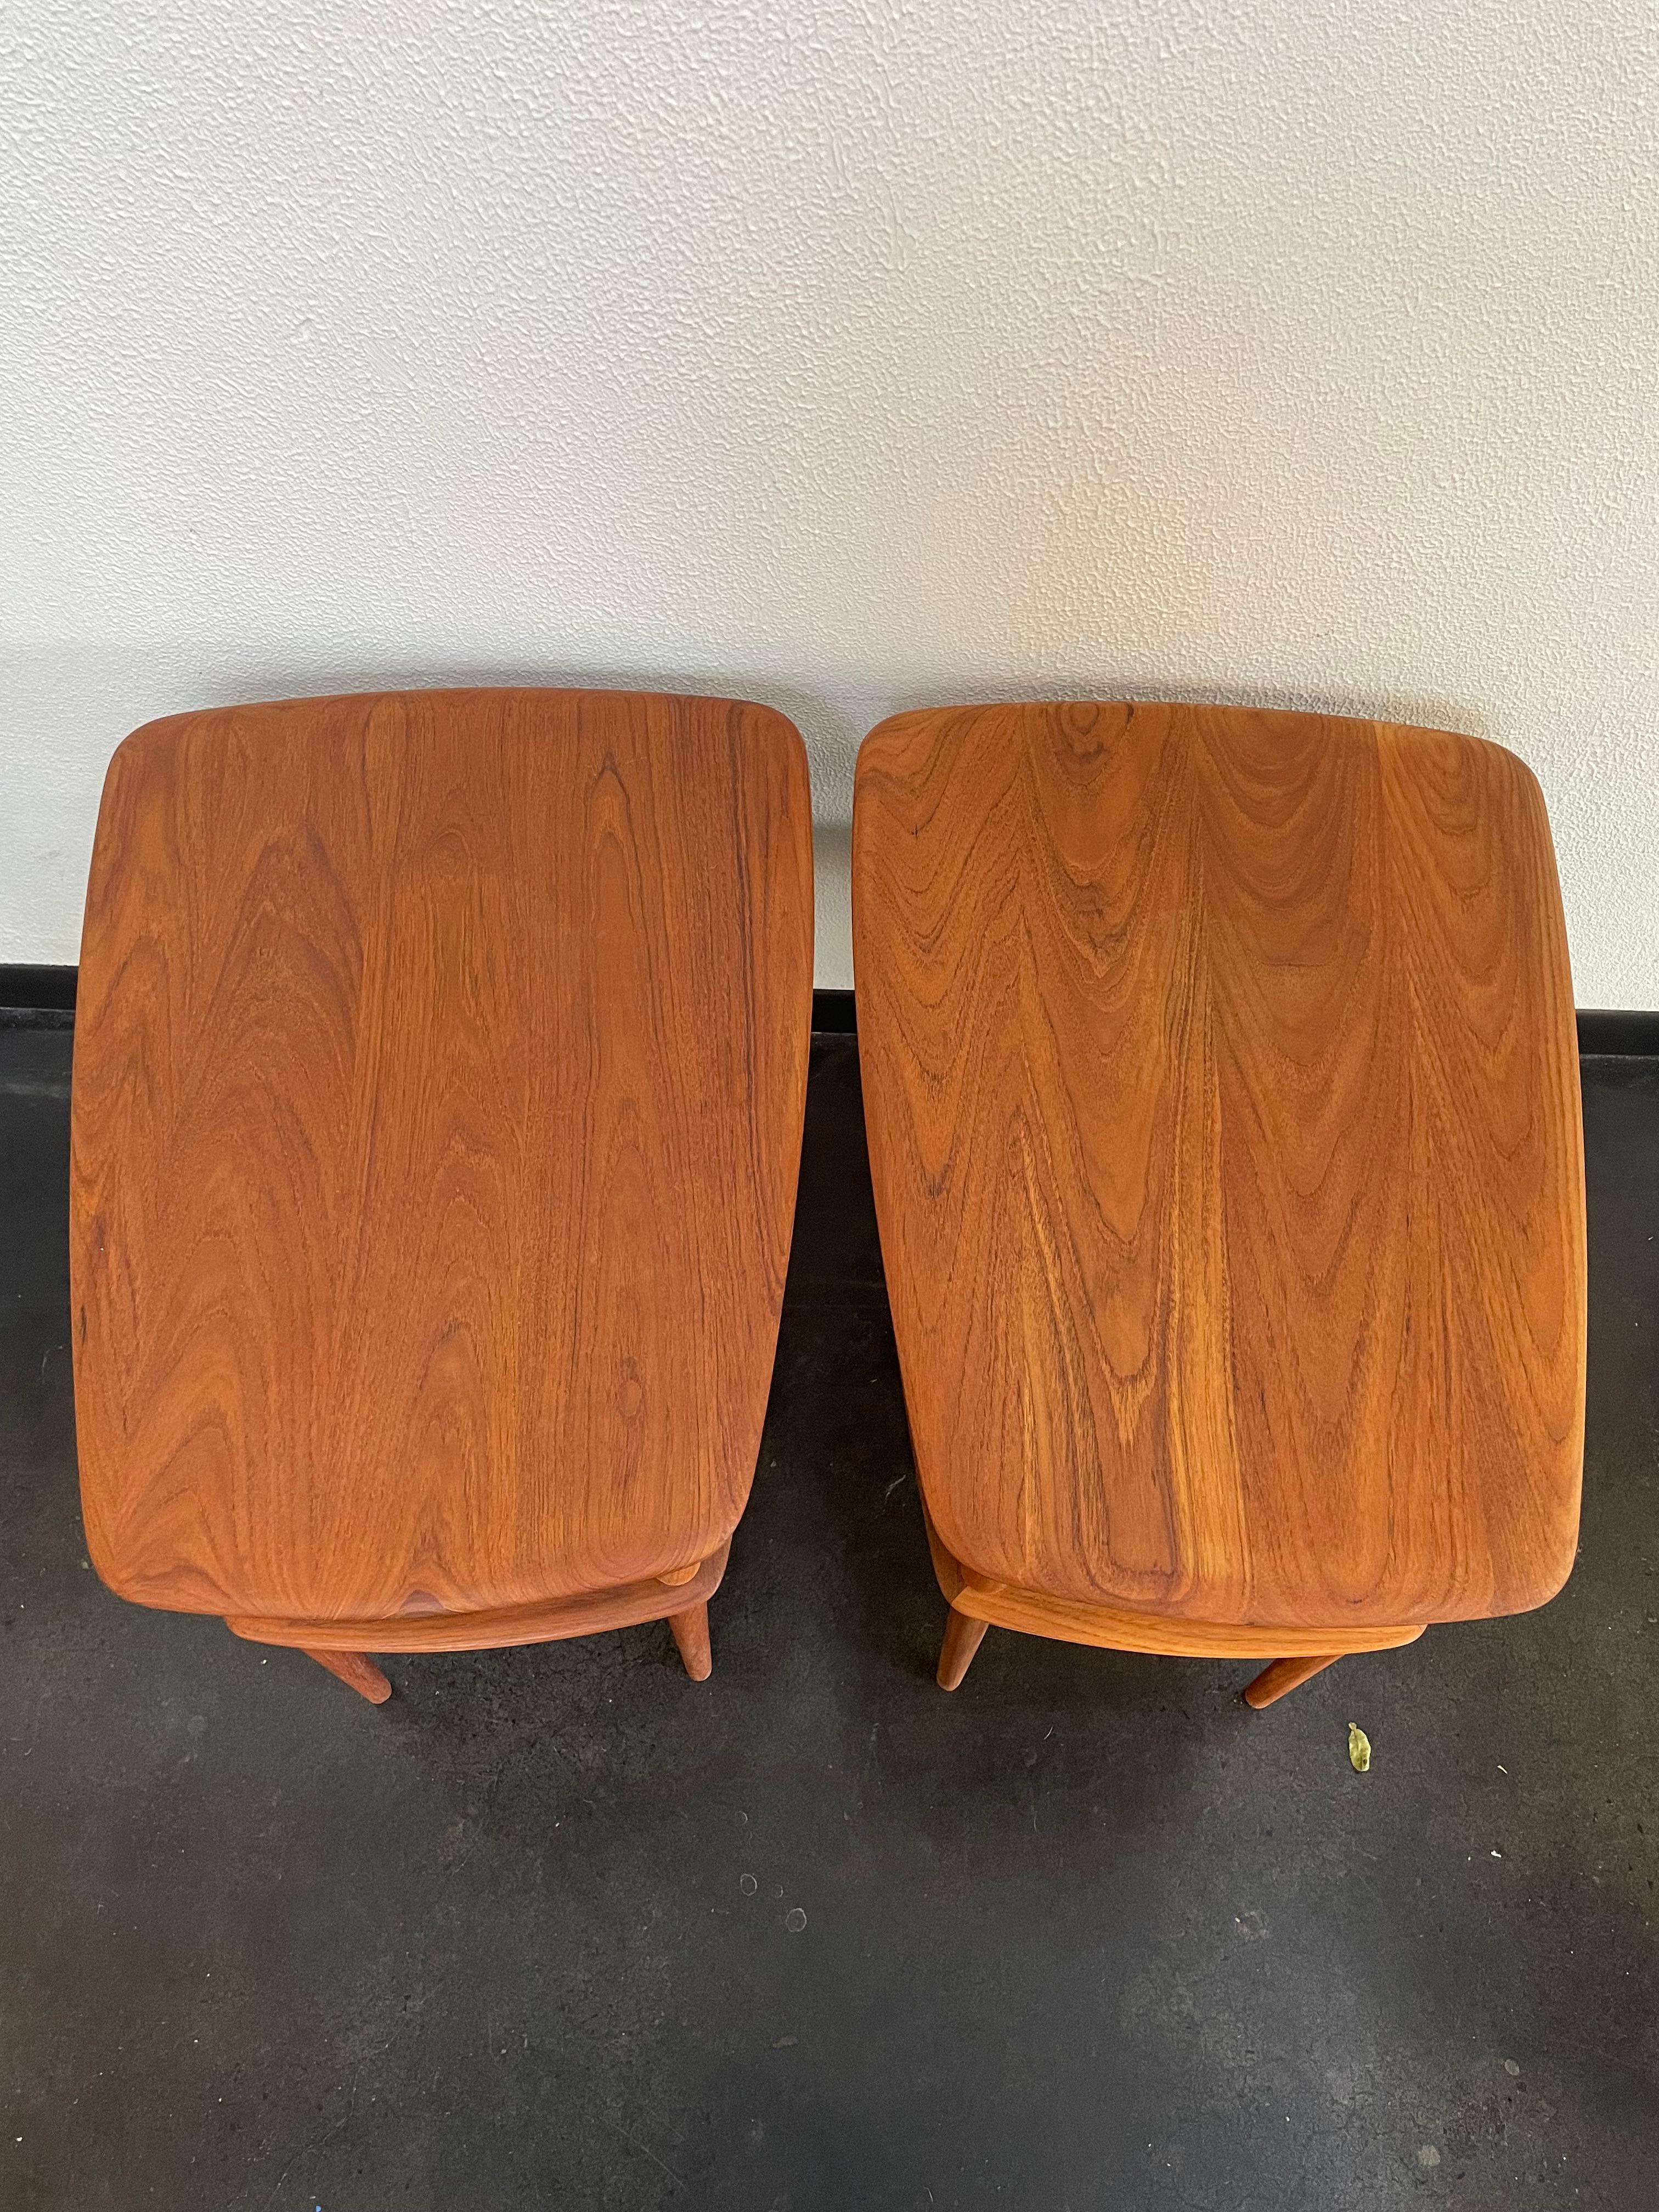 Beautifully shaped Danish Peter Hvidt France and Son teak end tables. Cane insert below table for extra shelving storage. New cane on one of them, refinished wood.